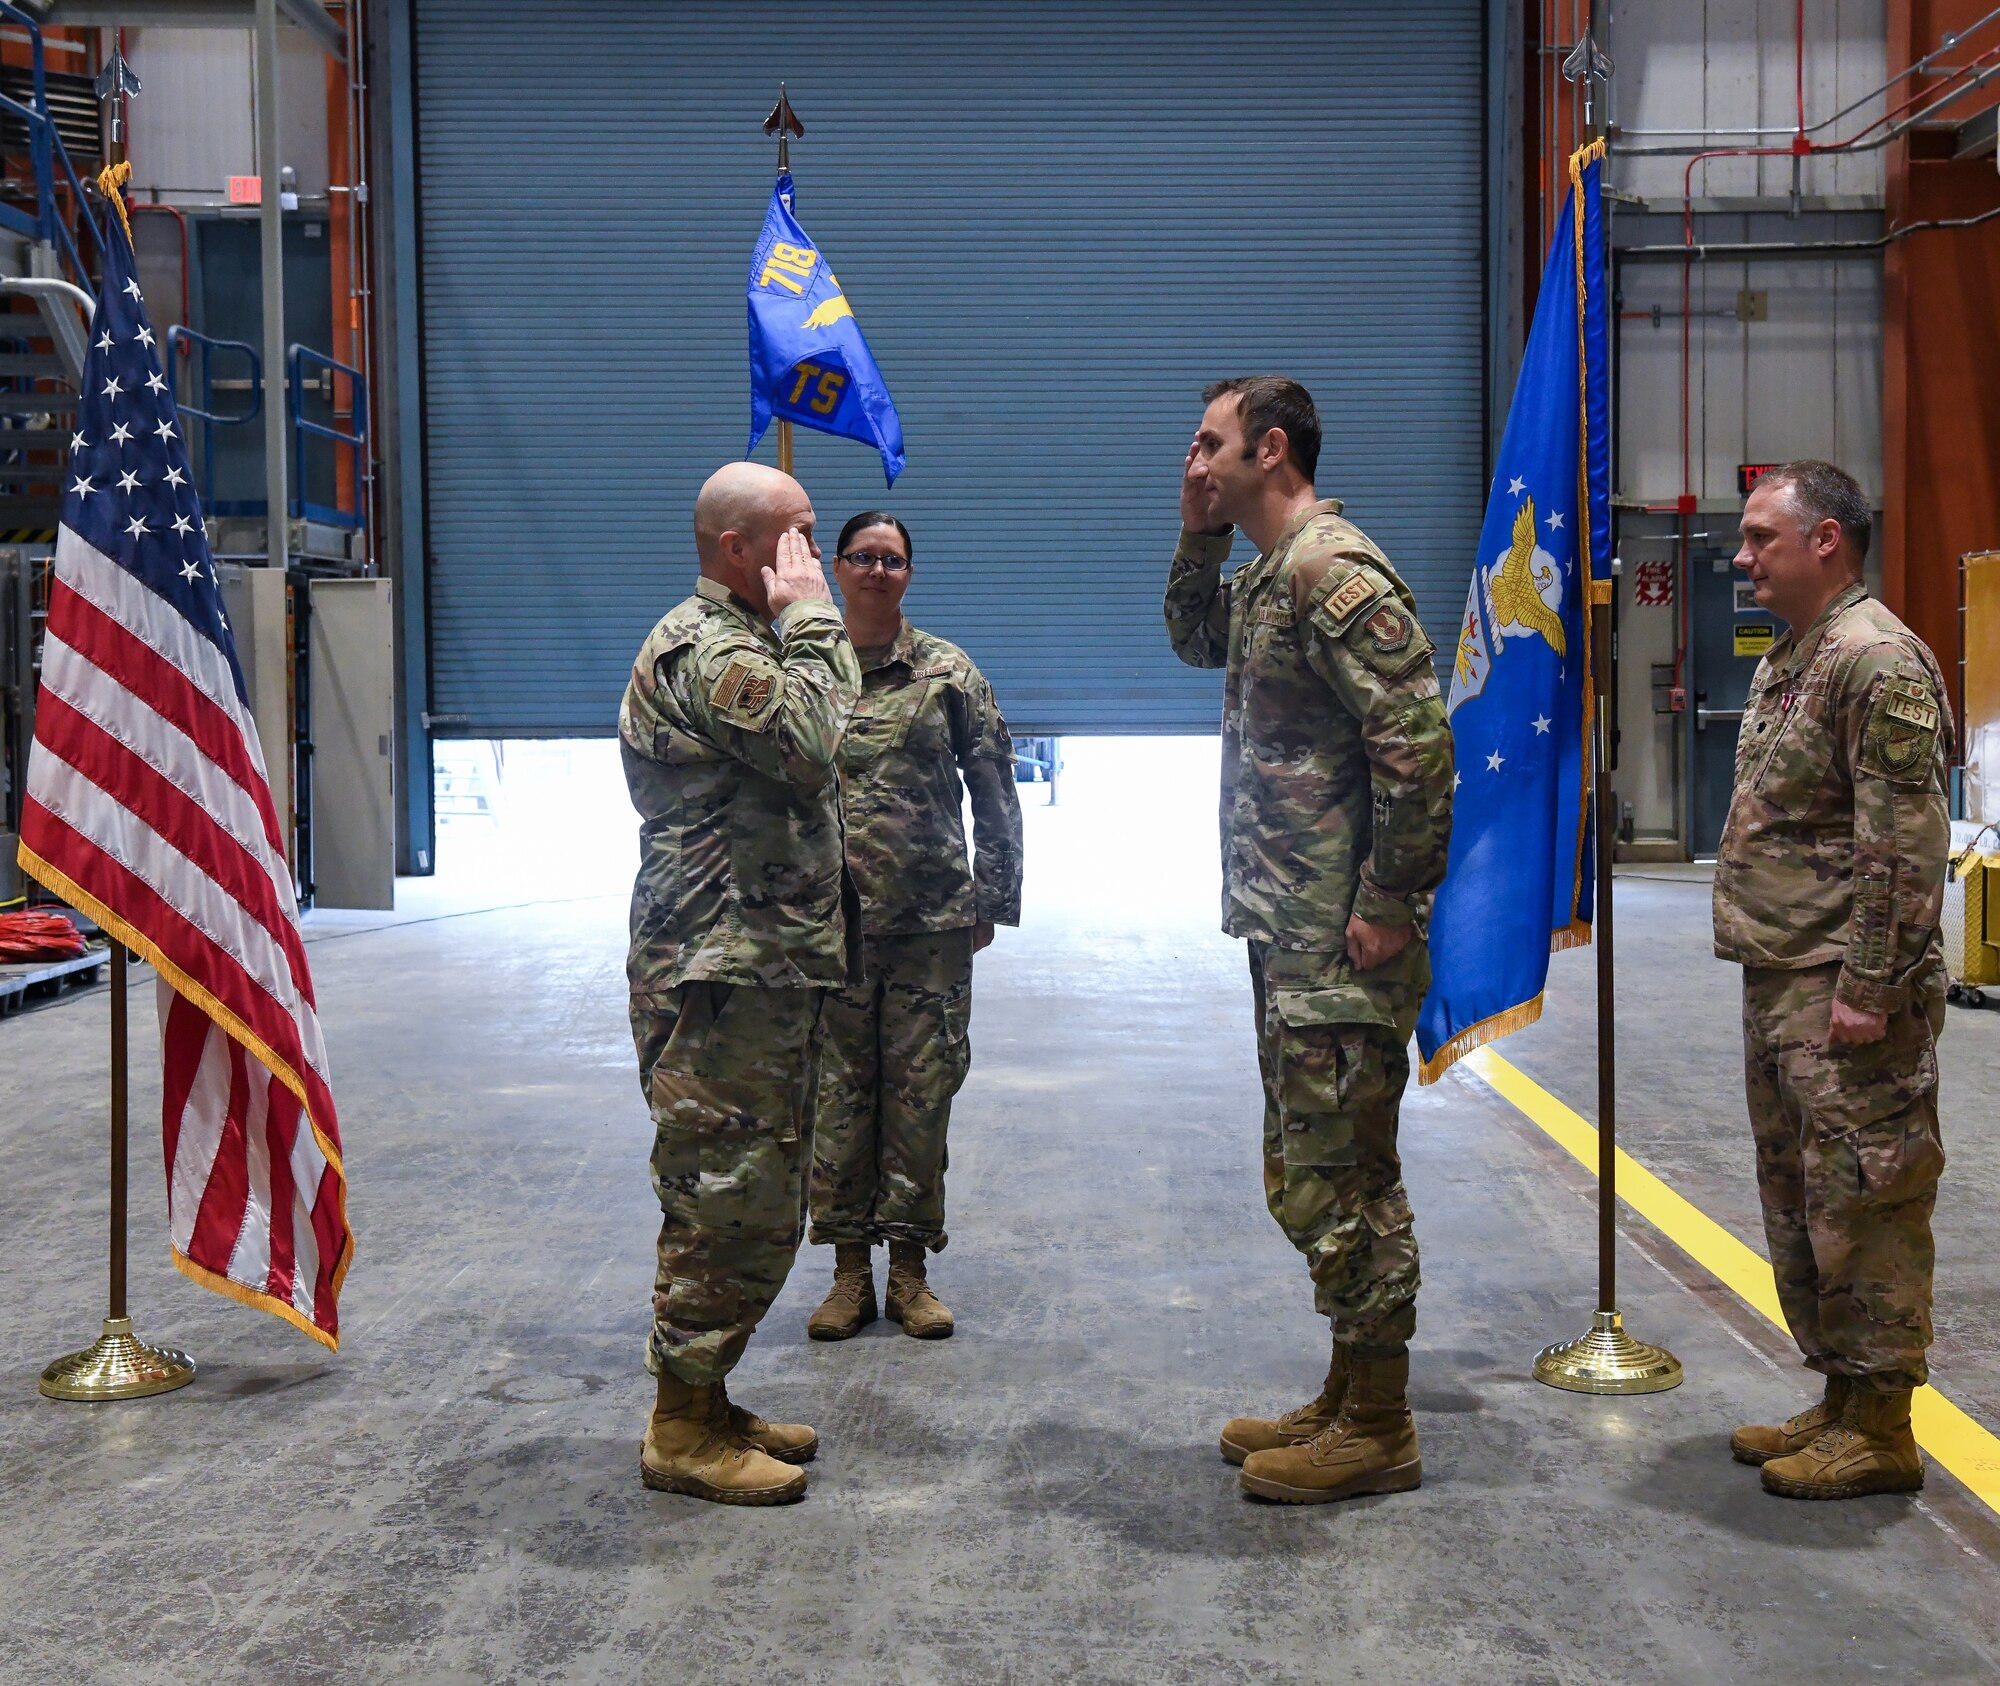 Lt. Col. Bradley Breaux, center, salutes Col. Jason Vap, commander of the 804th Test Group, Arnold Engineering Development Complex, after accepting command of the 718th Test Squadron during a change of leadership ceremony at Arnold Air Force Base, Tenn., June 15, 2023. Also pictured at right is Lt. Col. Dayvid Prahl, who relinquished leadership of the squadron during the ceremony. (U.S. Air Force photo by Jill Pickett)